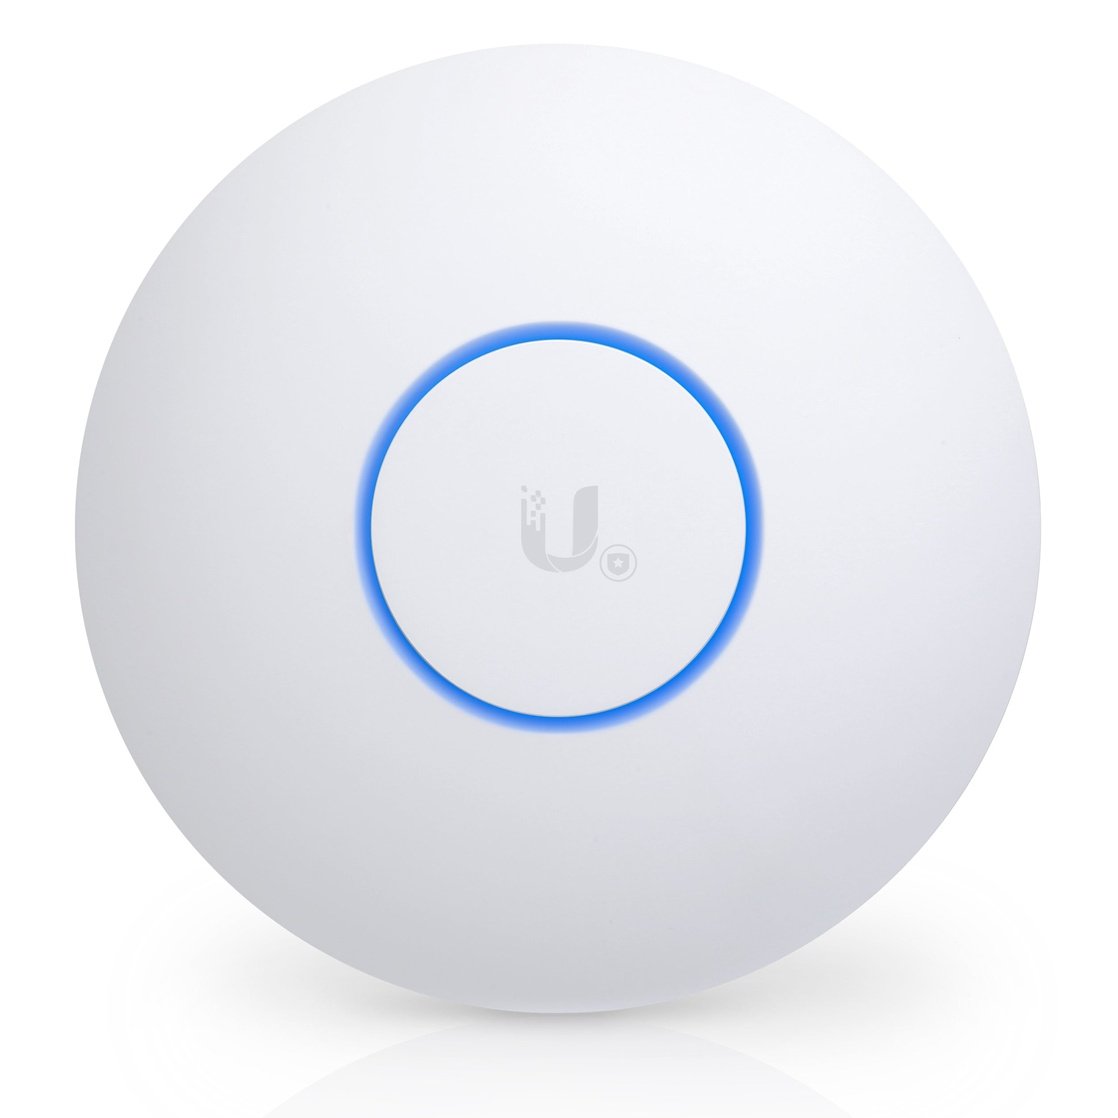 I5adbf404d9_e5511b35-e950-4cb1-885b-774342f805cd Ubiquiti Unifi Access Point NanoHD / Indoor / 2,4 & 5 GHz / AC Wave 2 / 4x4 MIMO / UAP-NanoHD-5 / 5er Pack Accesspoint ubiquiti WIFI wifi 6 router